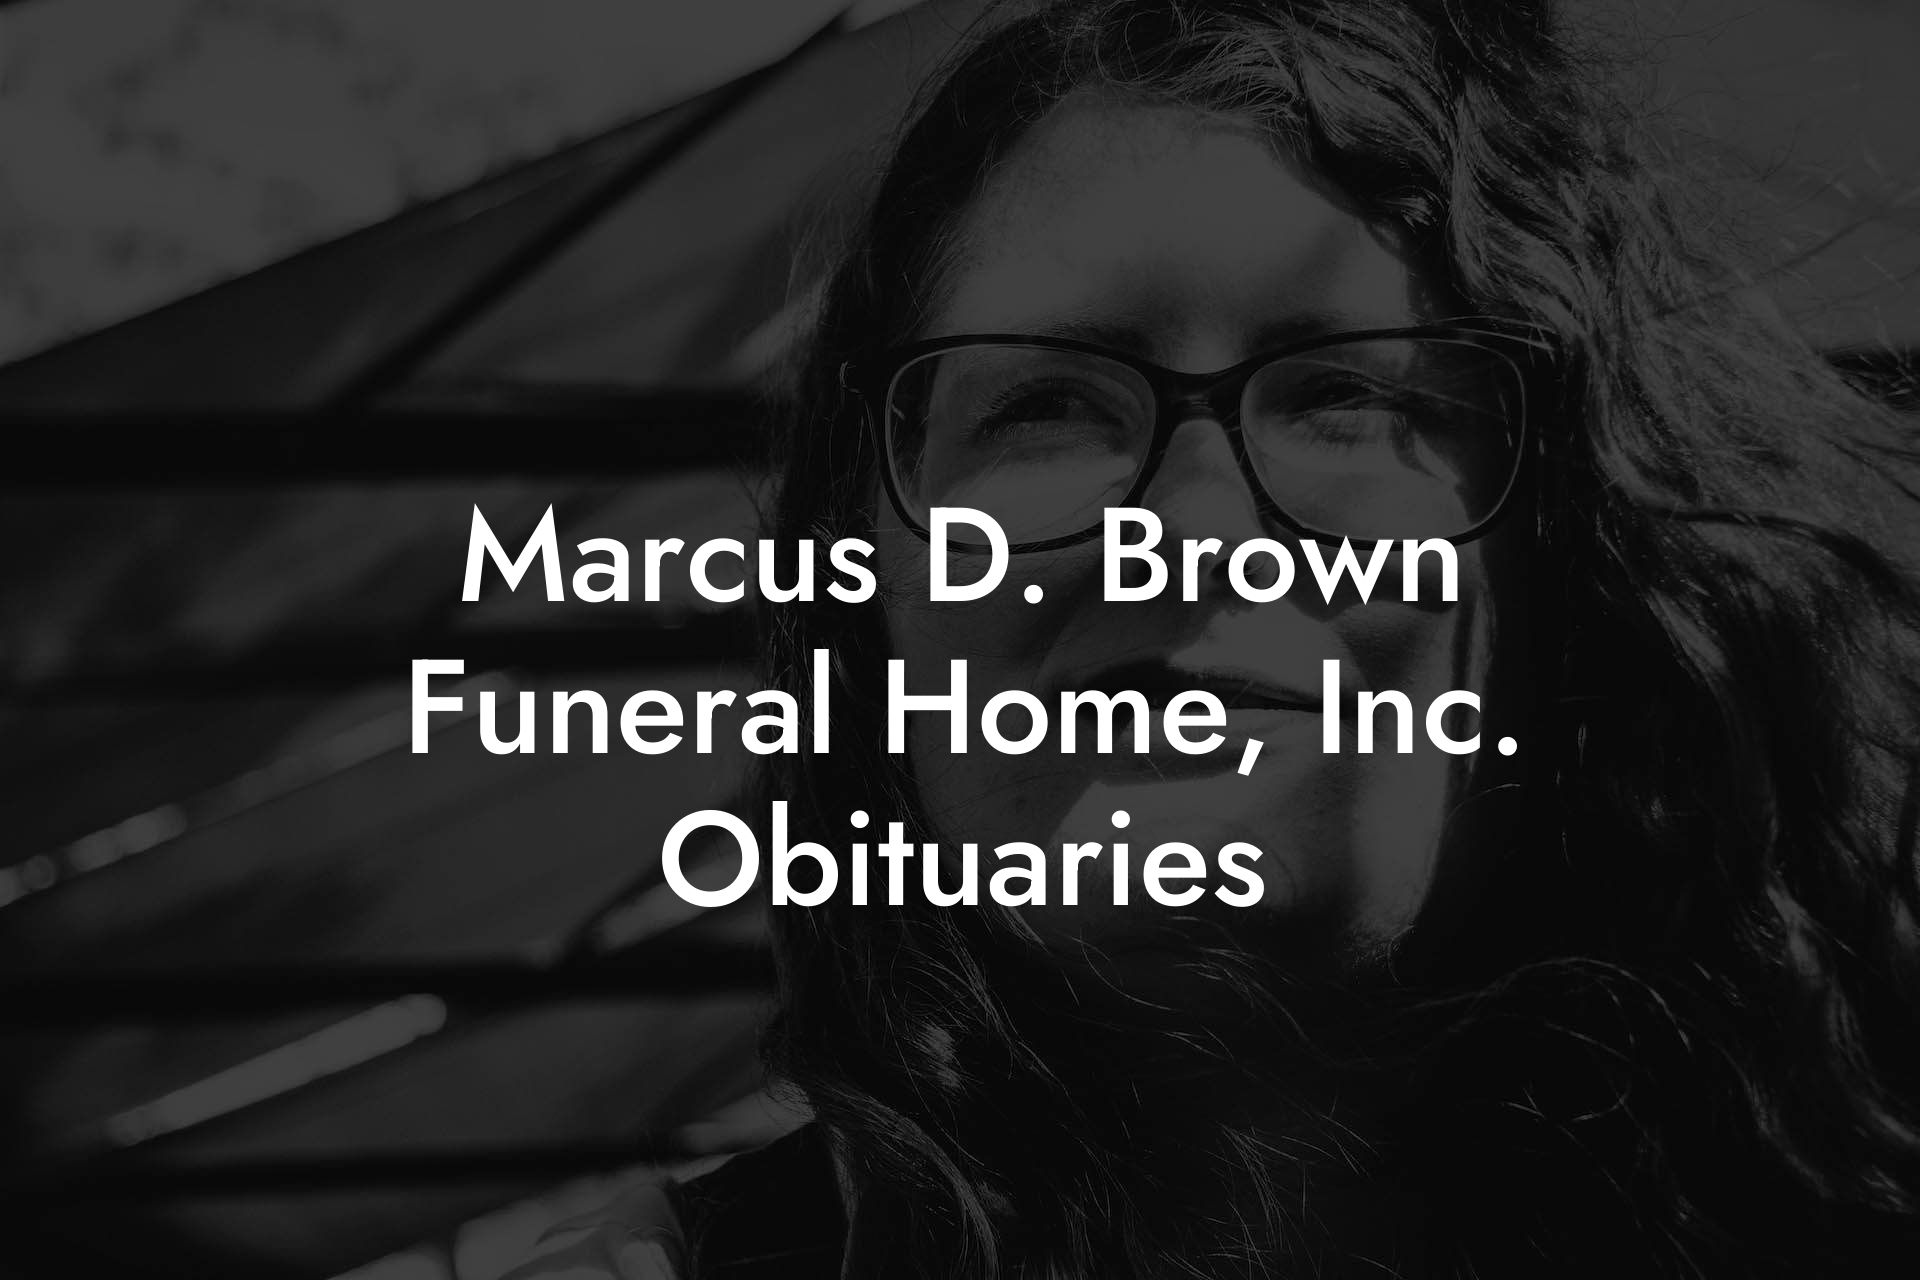 Marcus D. Brown Funeral Home, Inc. Obituaries